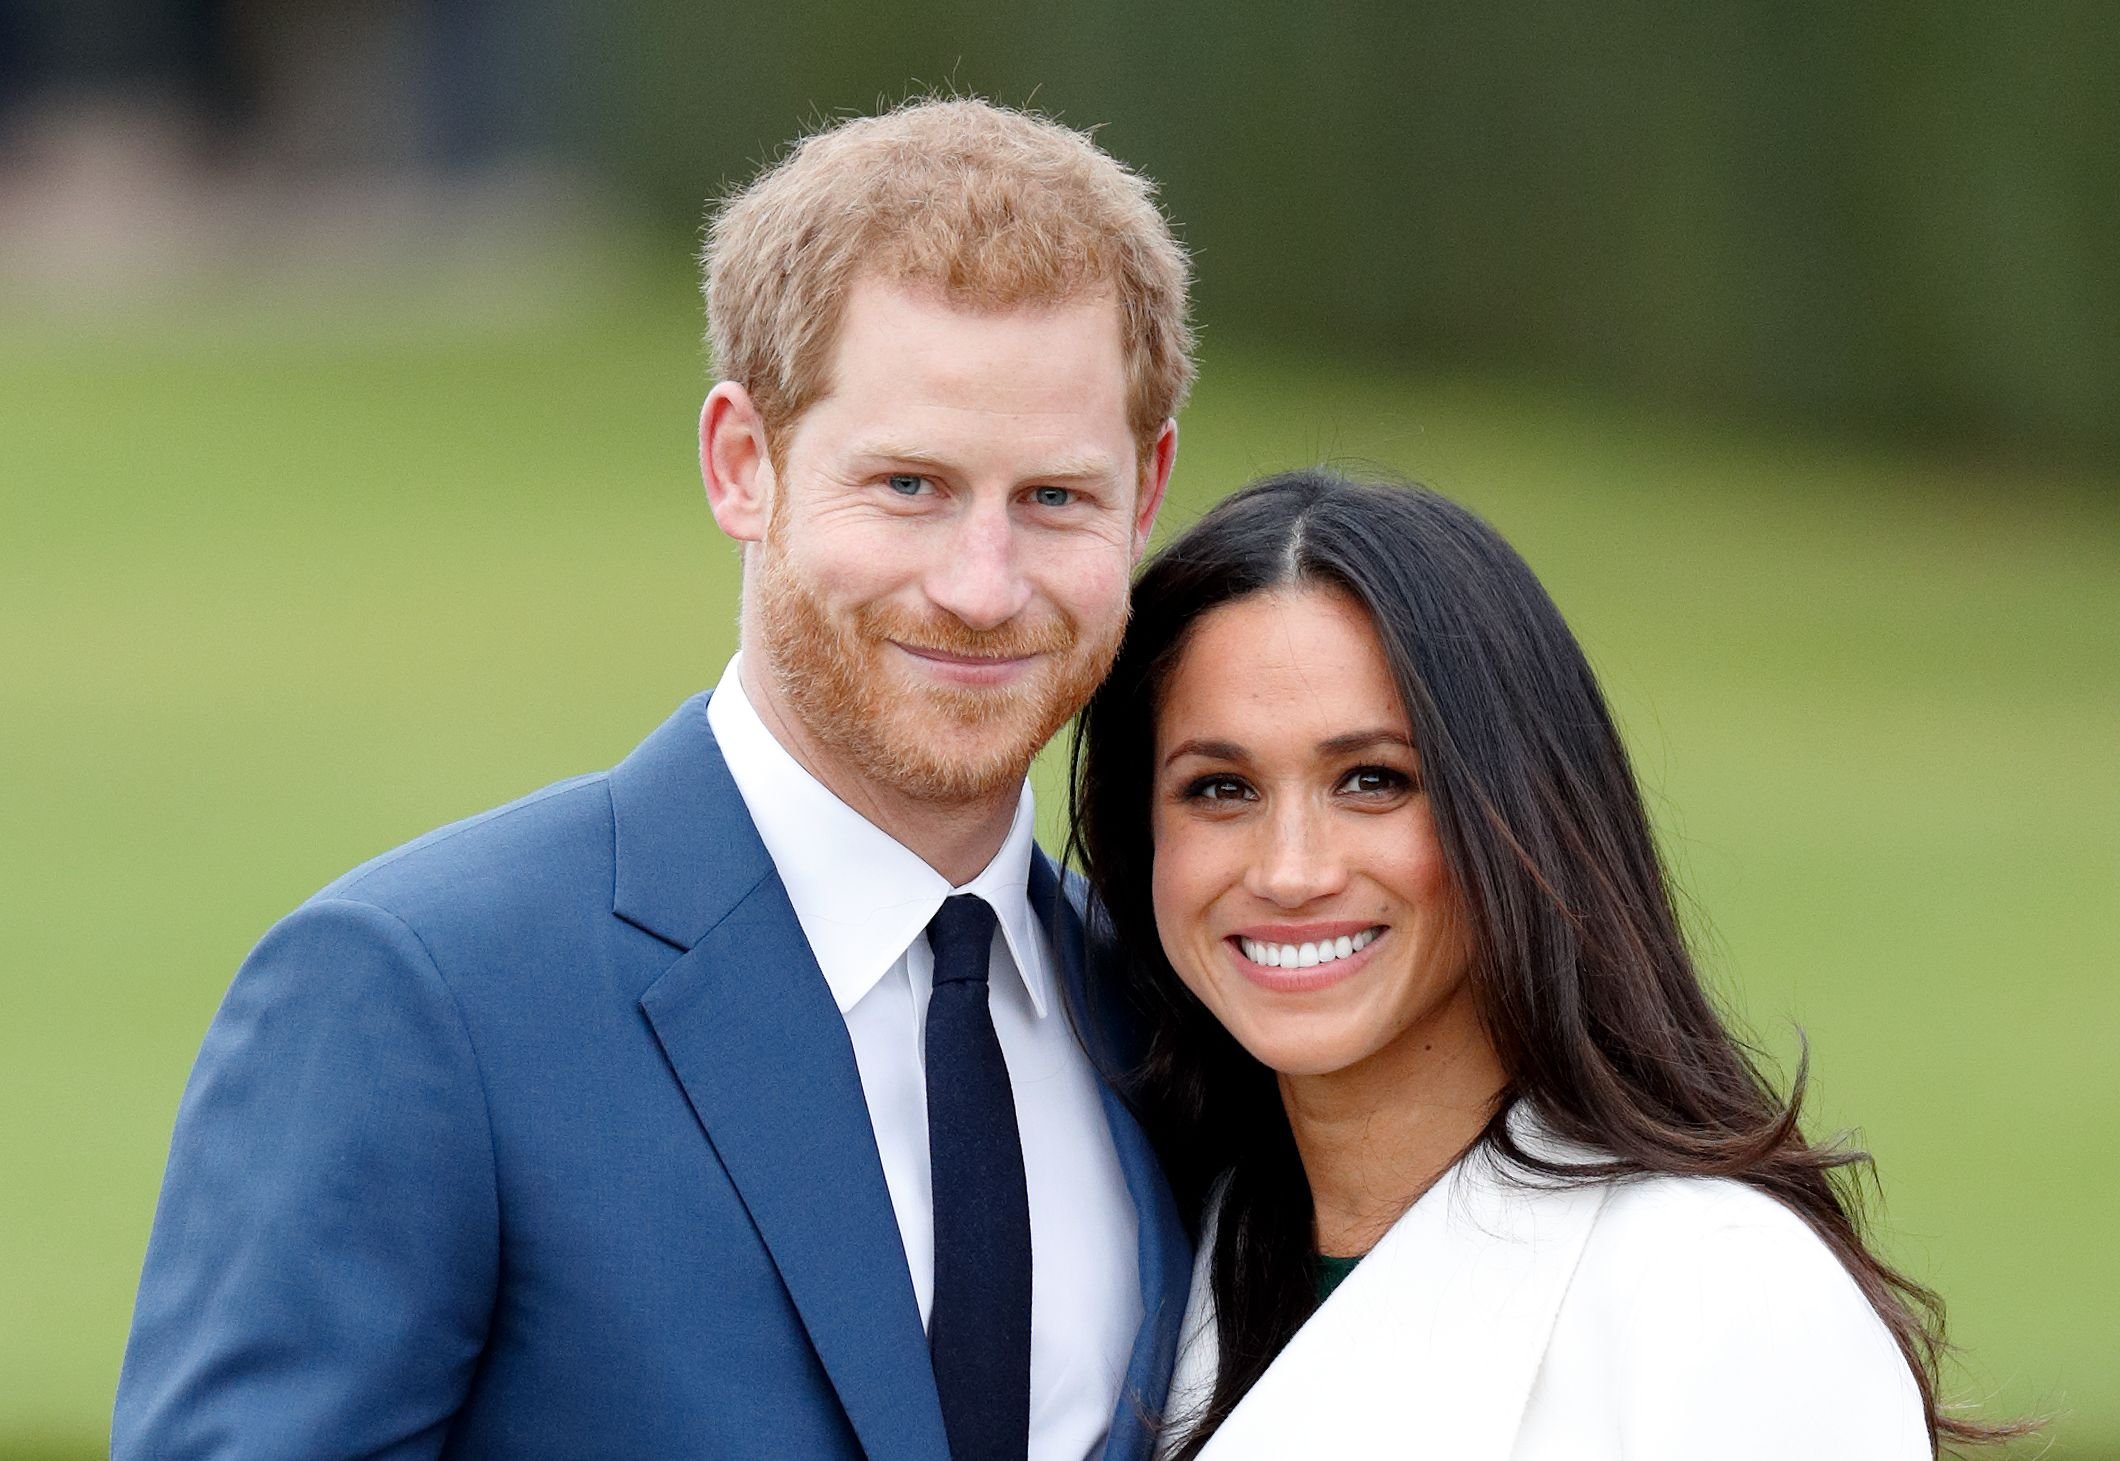 Prince Harry and Meghan Markle at an official photocall to announce their engagement at The Sunken Gardens, Kensington Palace on November 27, 2017 | Photo: Getty Images